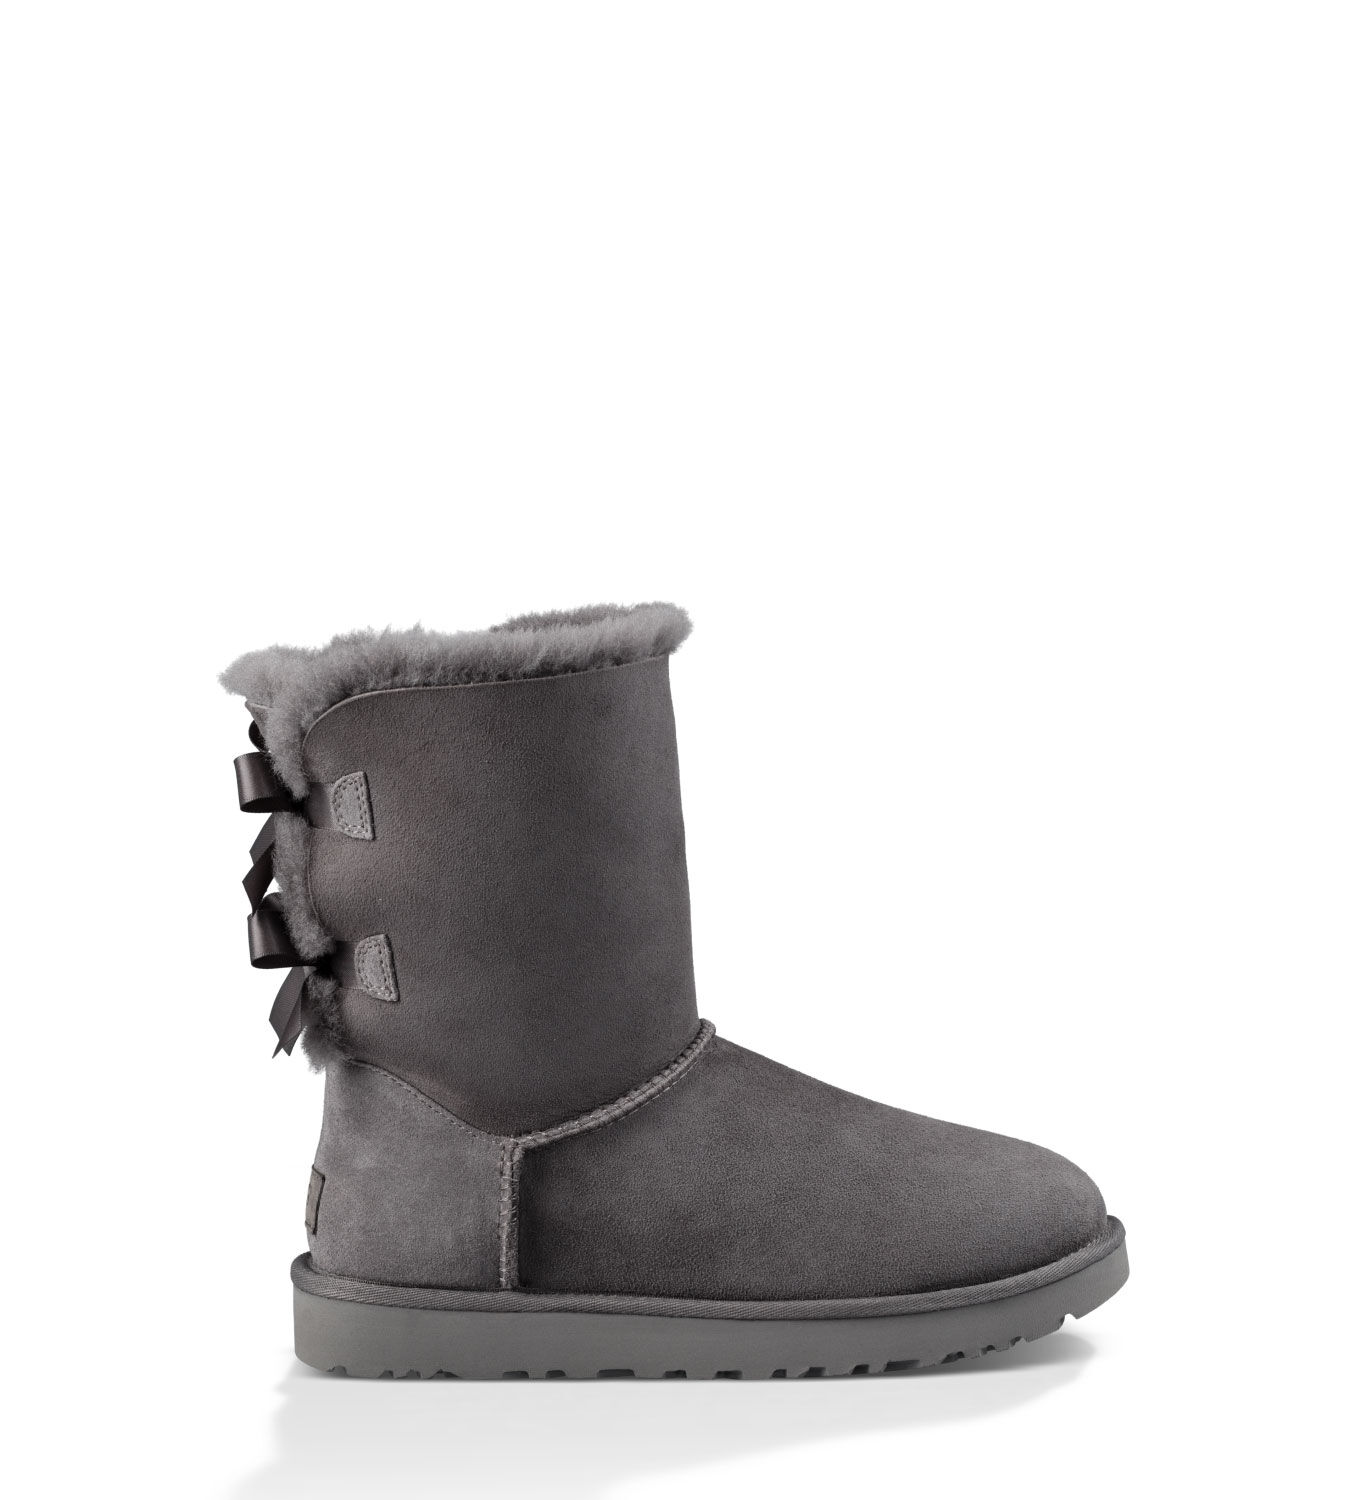 gray ugg boots sale